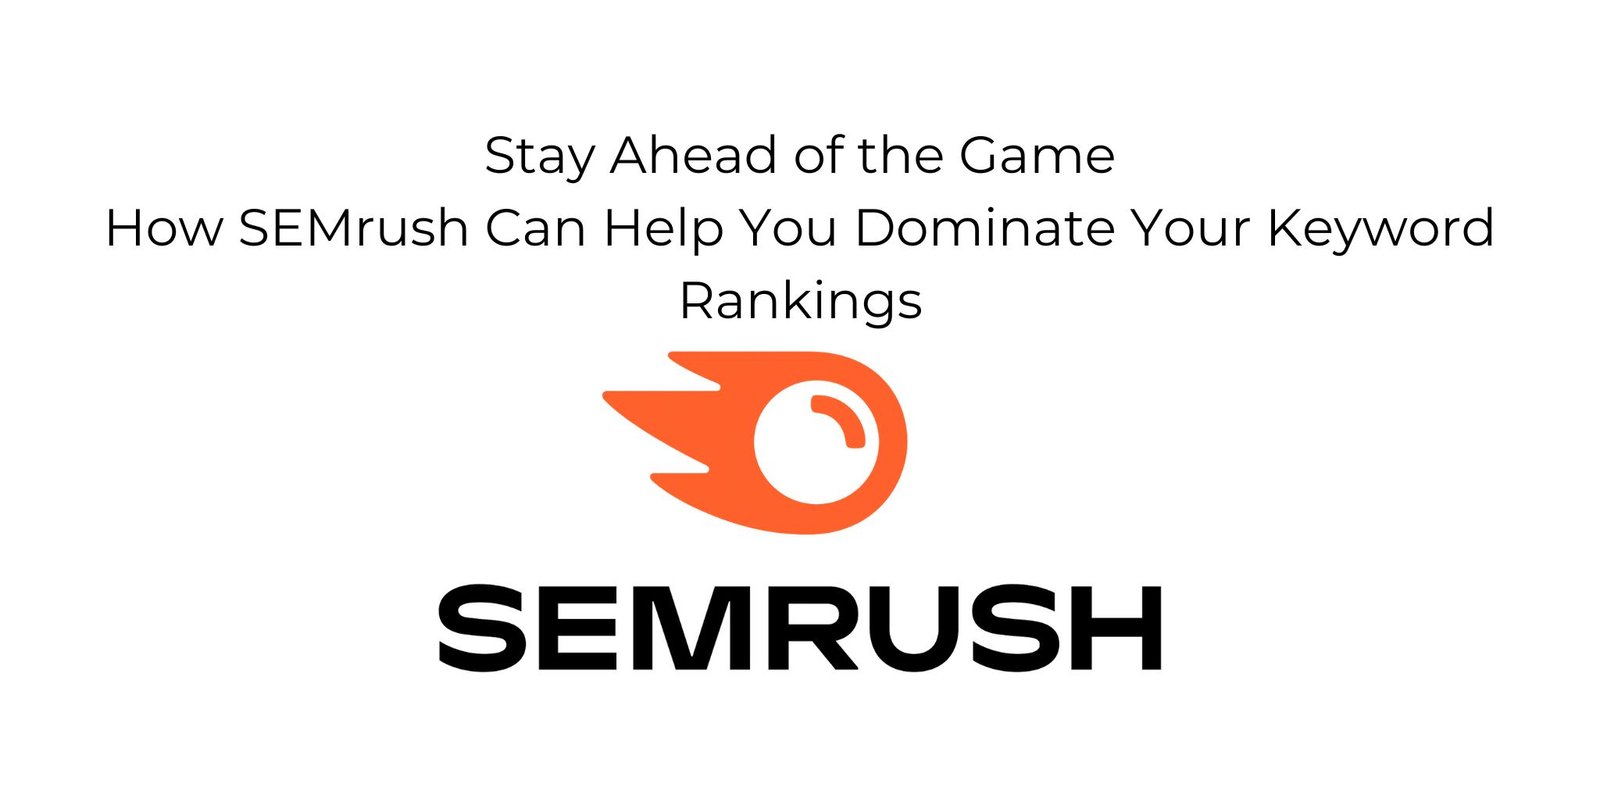 Stay Ahead of the Game: How SEMrush Can Help You Dominate Your Keyword Rankings